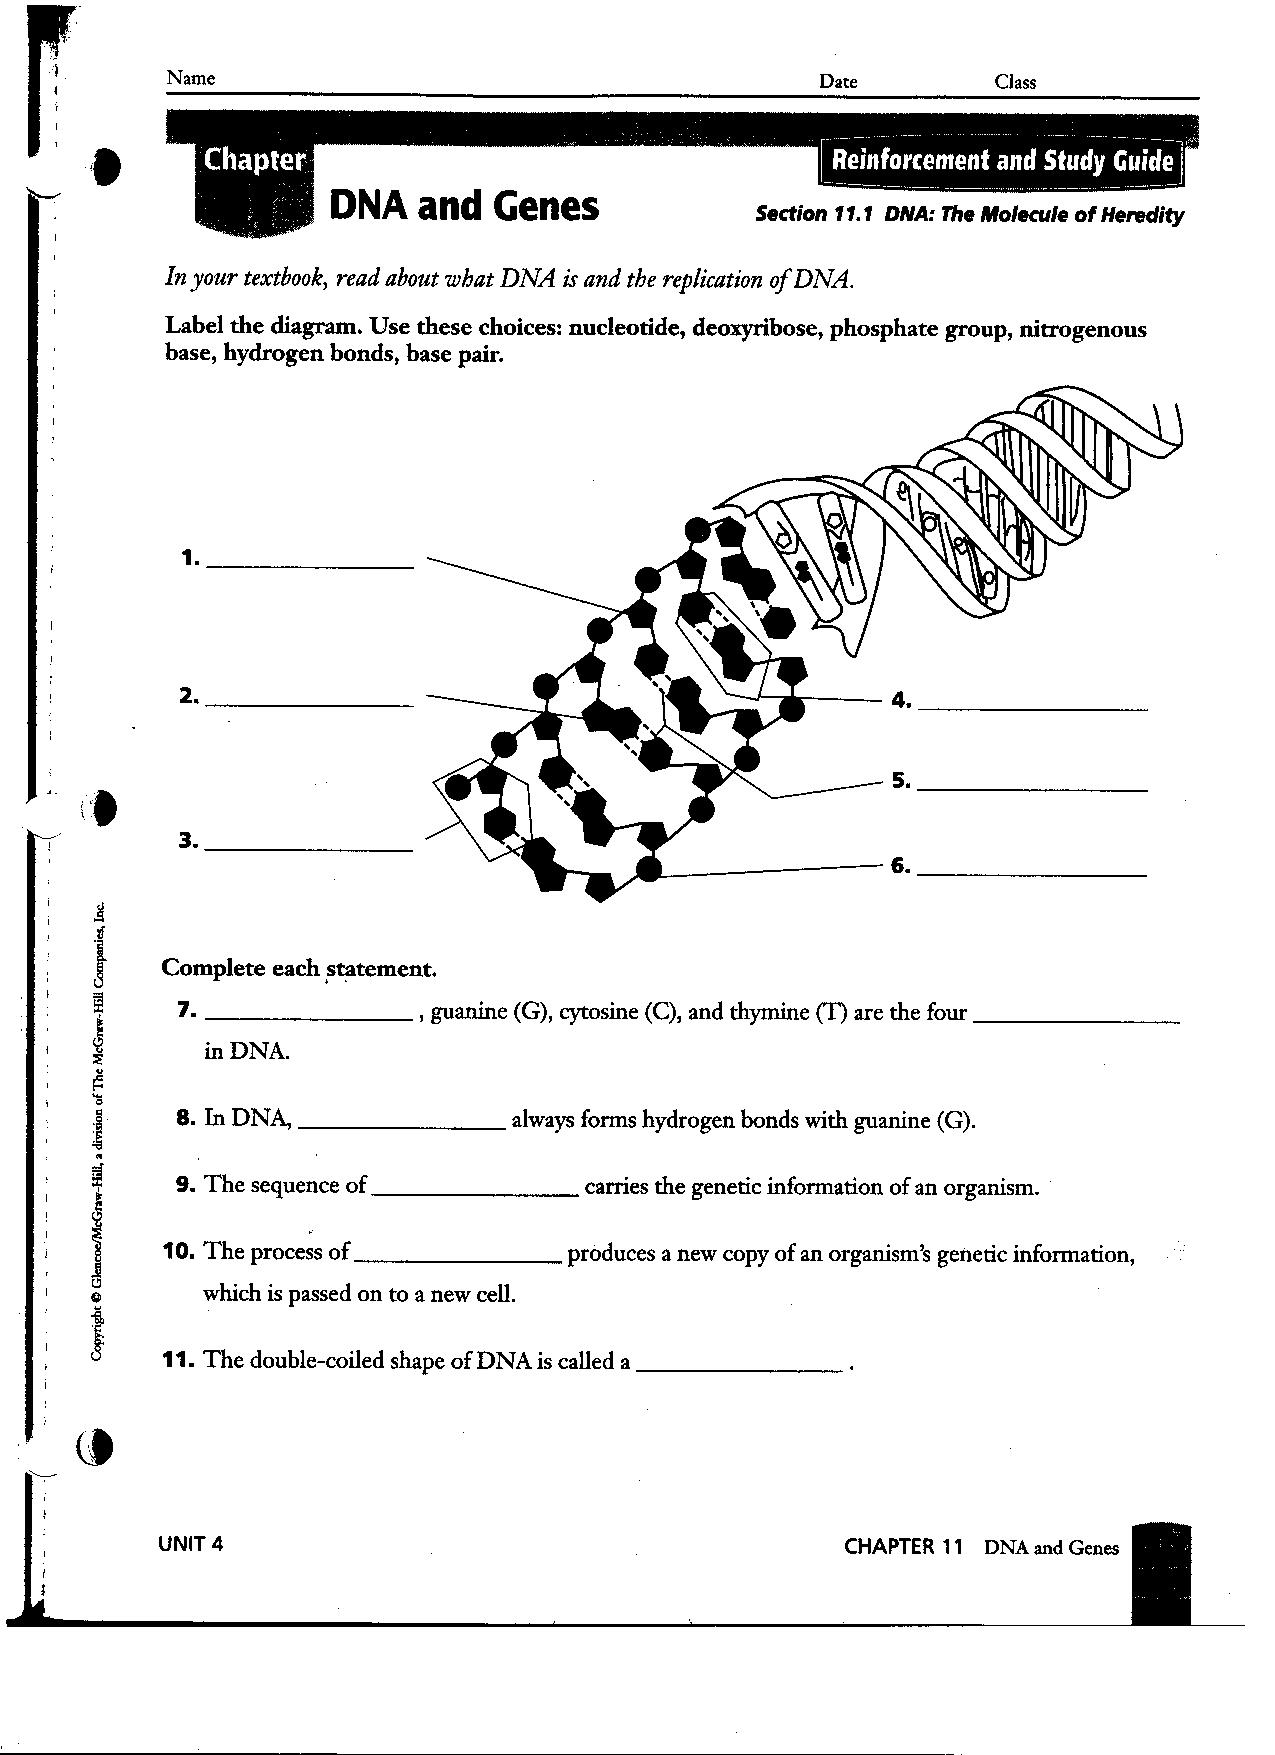 dna-replication-worksheet-answer-key-quizlet-dna-structure-and-replication-worksheet-quizlet